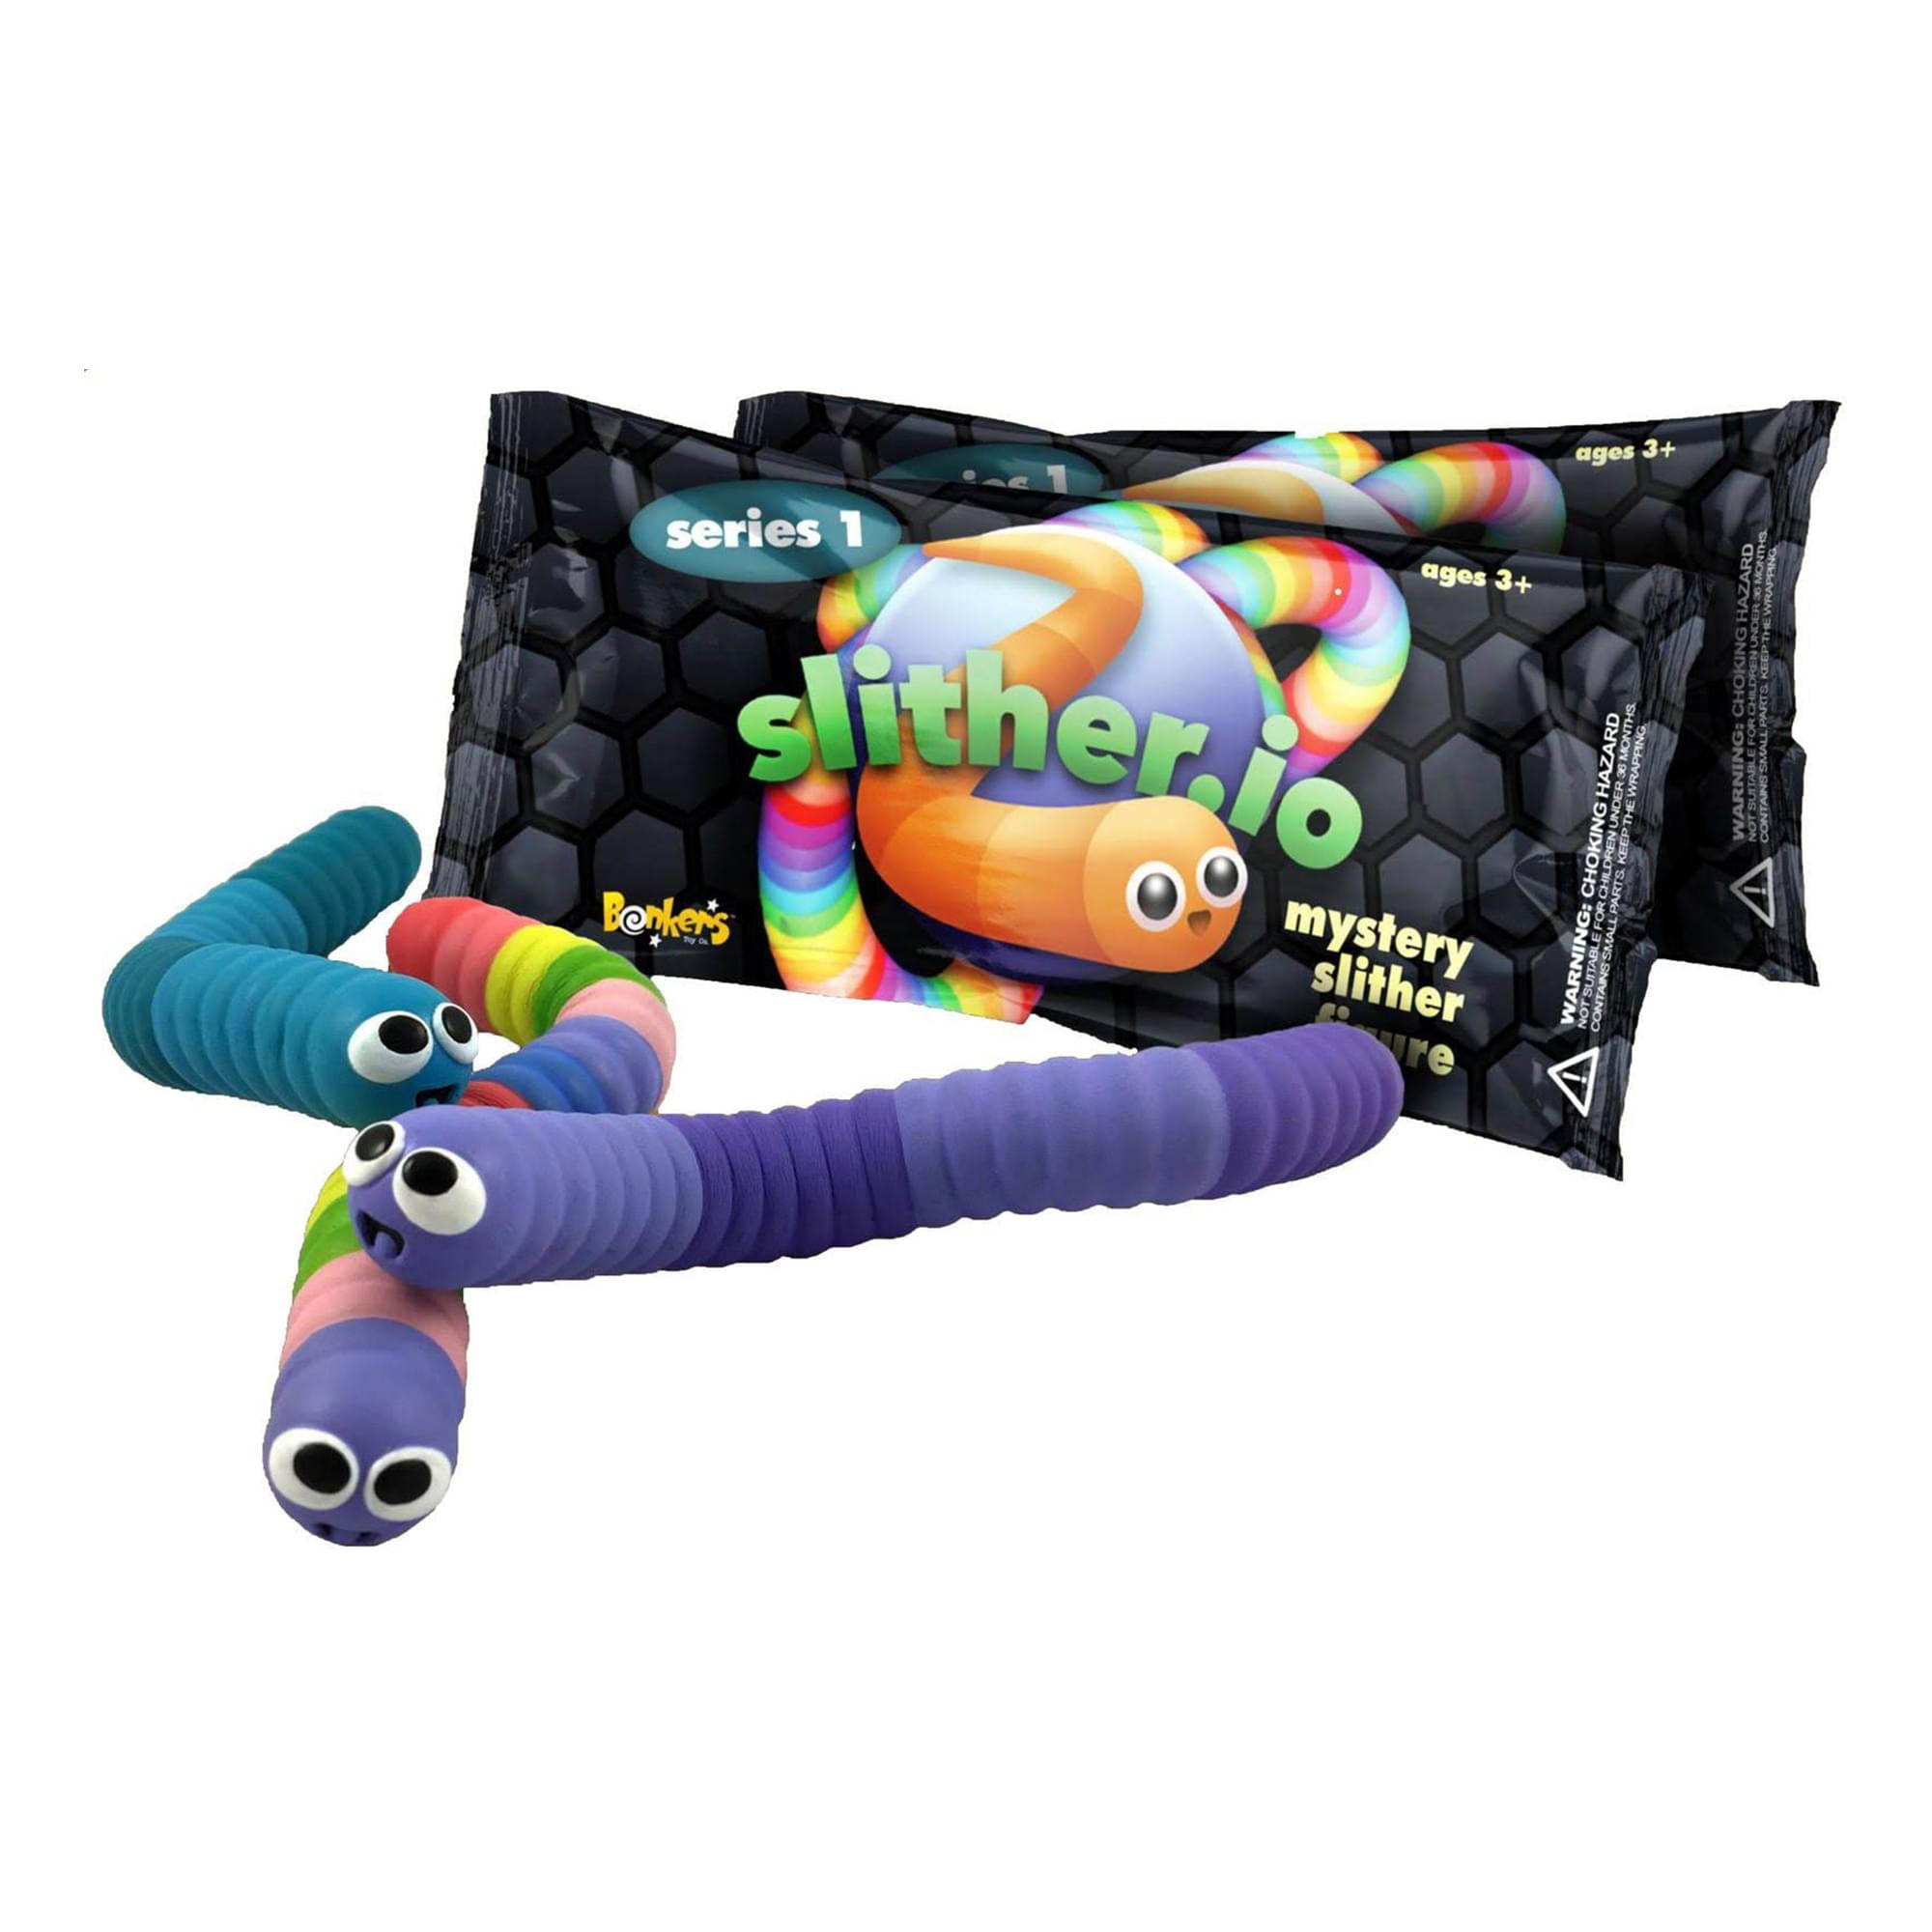 Win bundle of new Slither.io toys